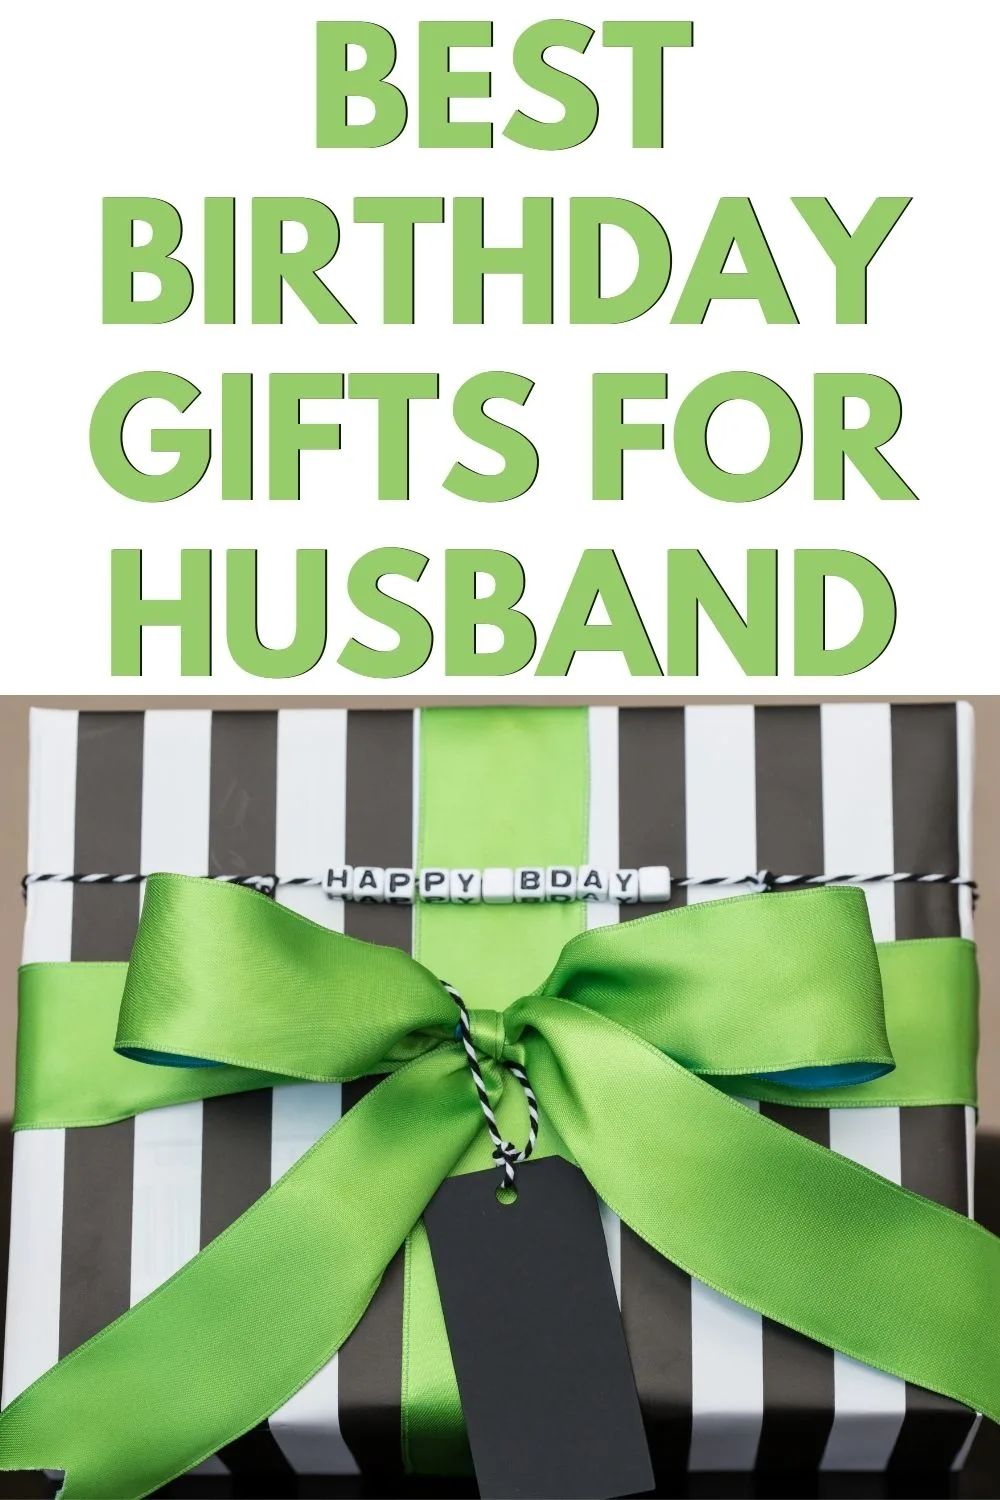 Best birthday gifts for husband